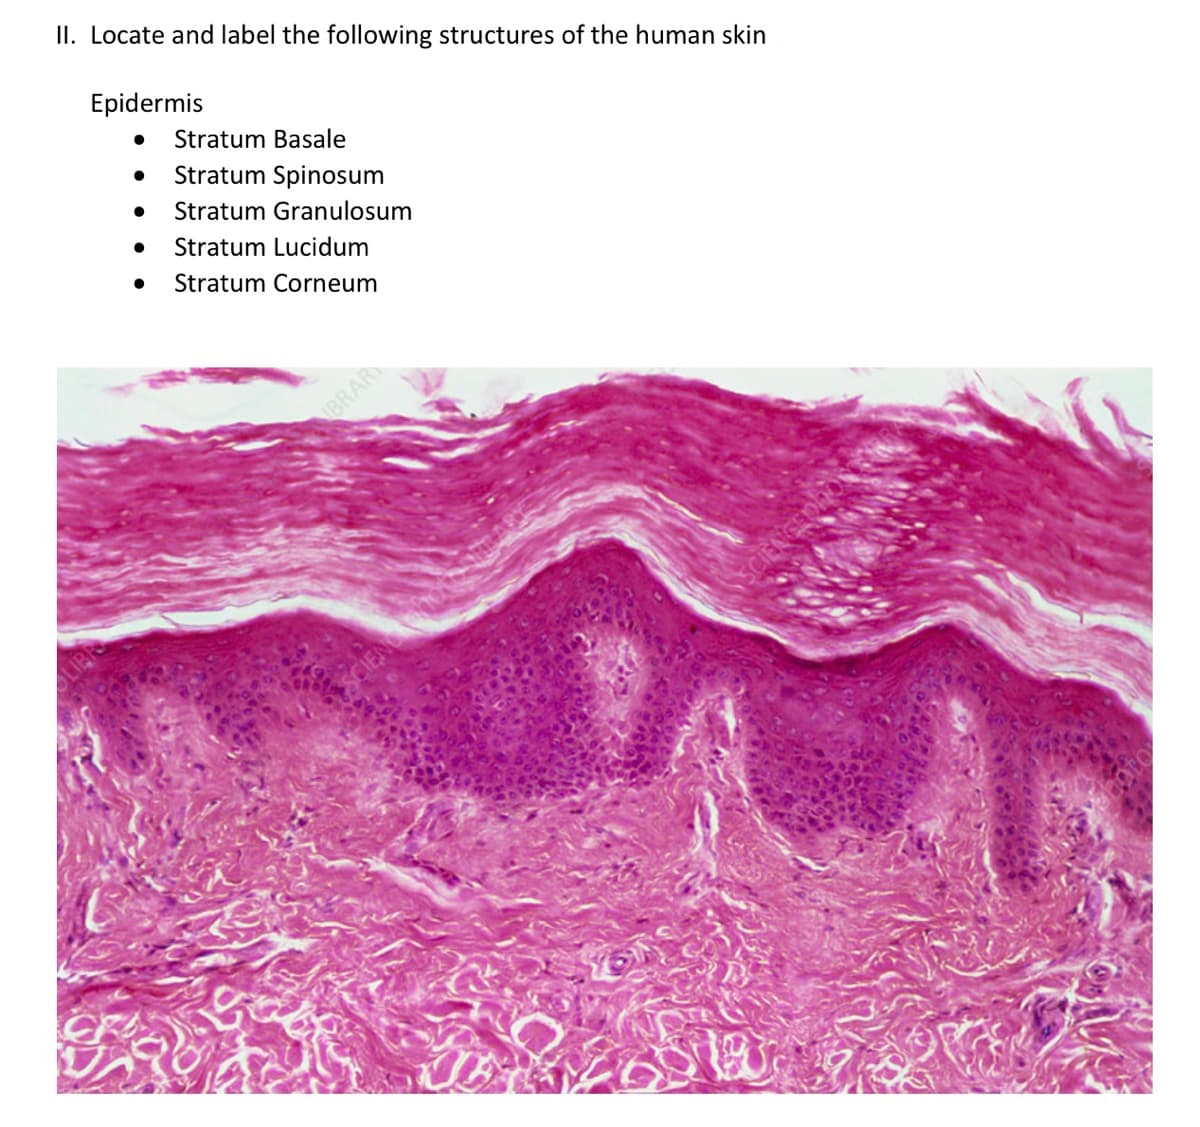 II. Locate and label the following structures of the human skin
Epidermis
Stratum Basale
Stratum Spinosum
Stratum Granulosum
Stratum Lucidum
Stratum Corneum
BRAR
